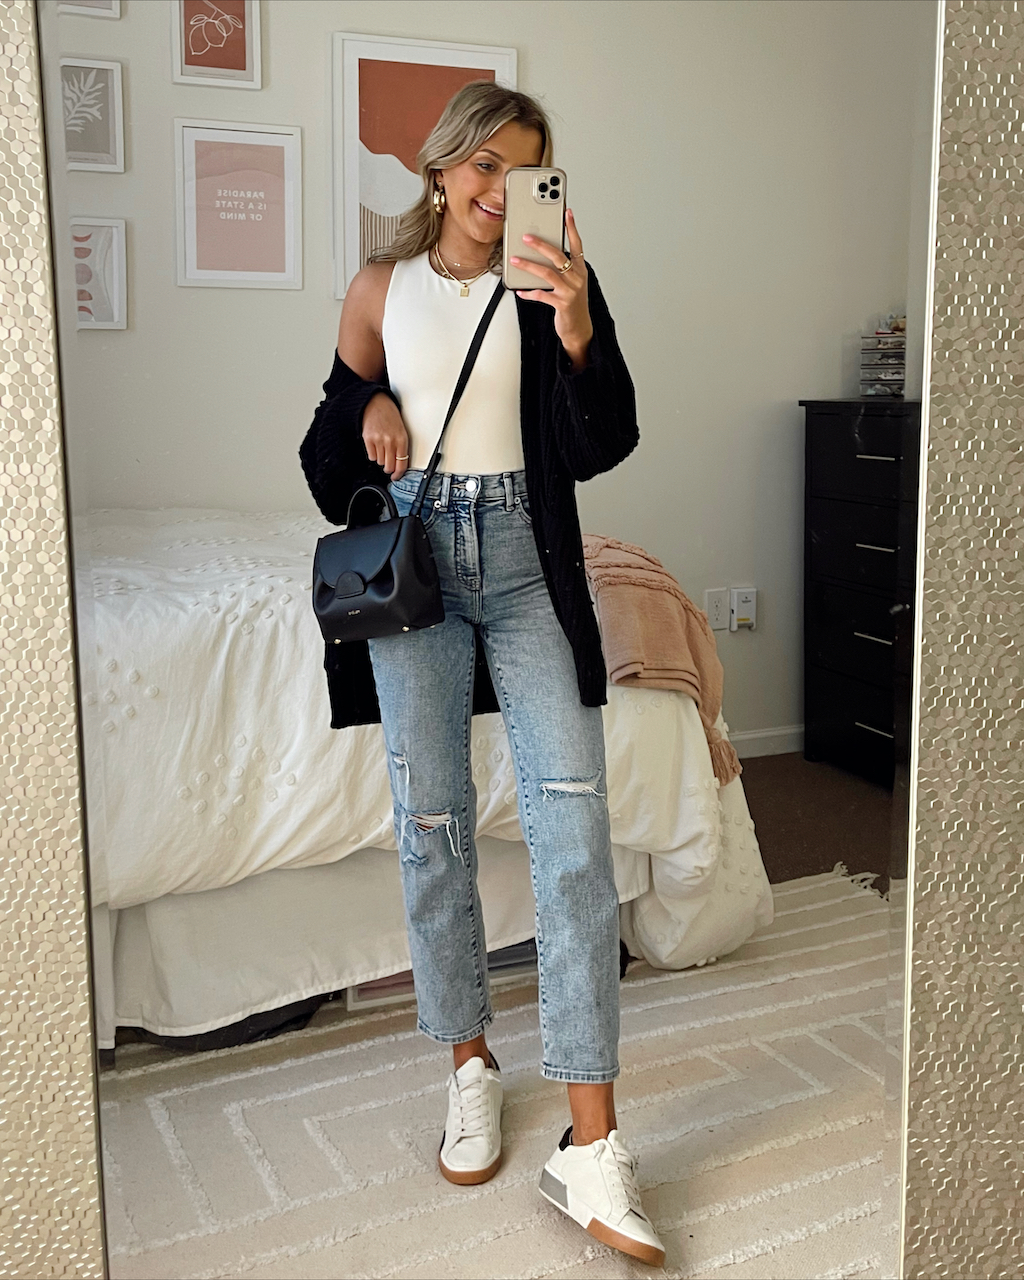 Weekly Wrap Up #11 2022 – Styled by McKenz